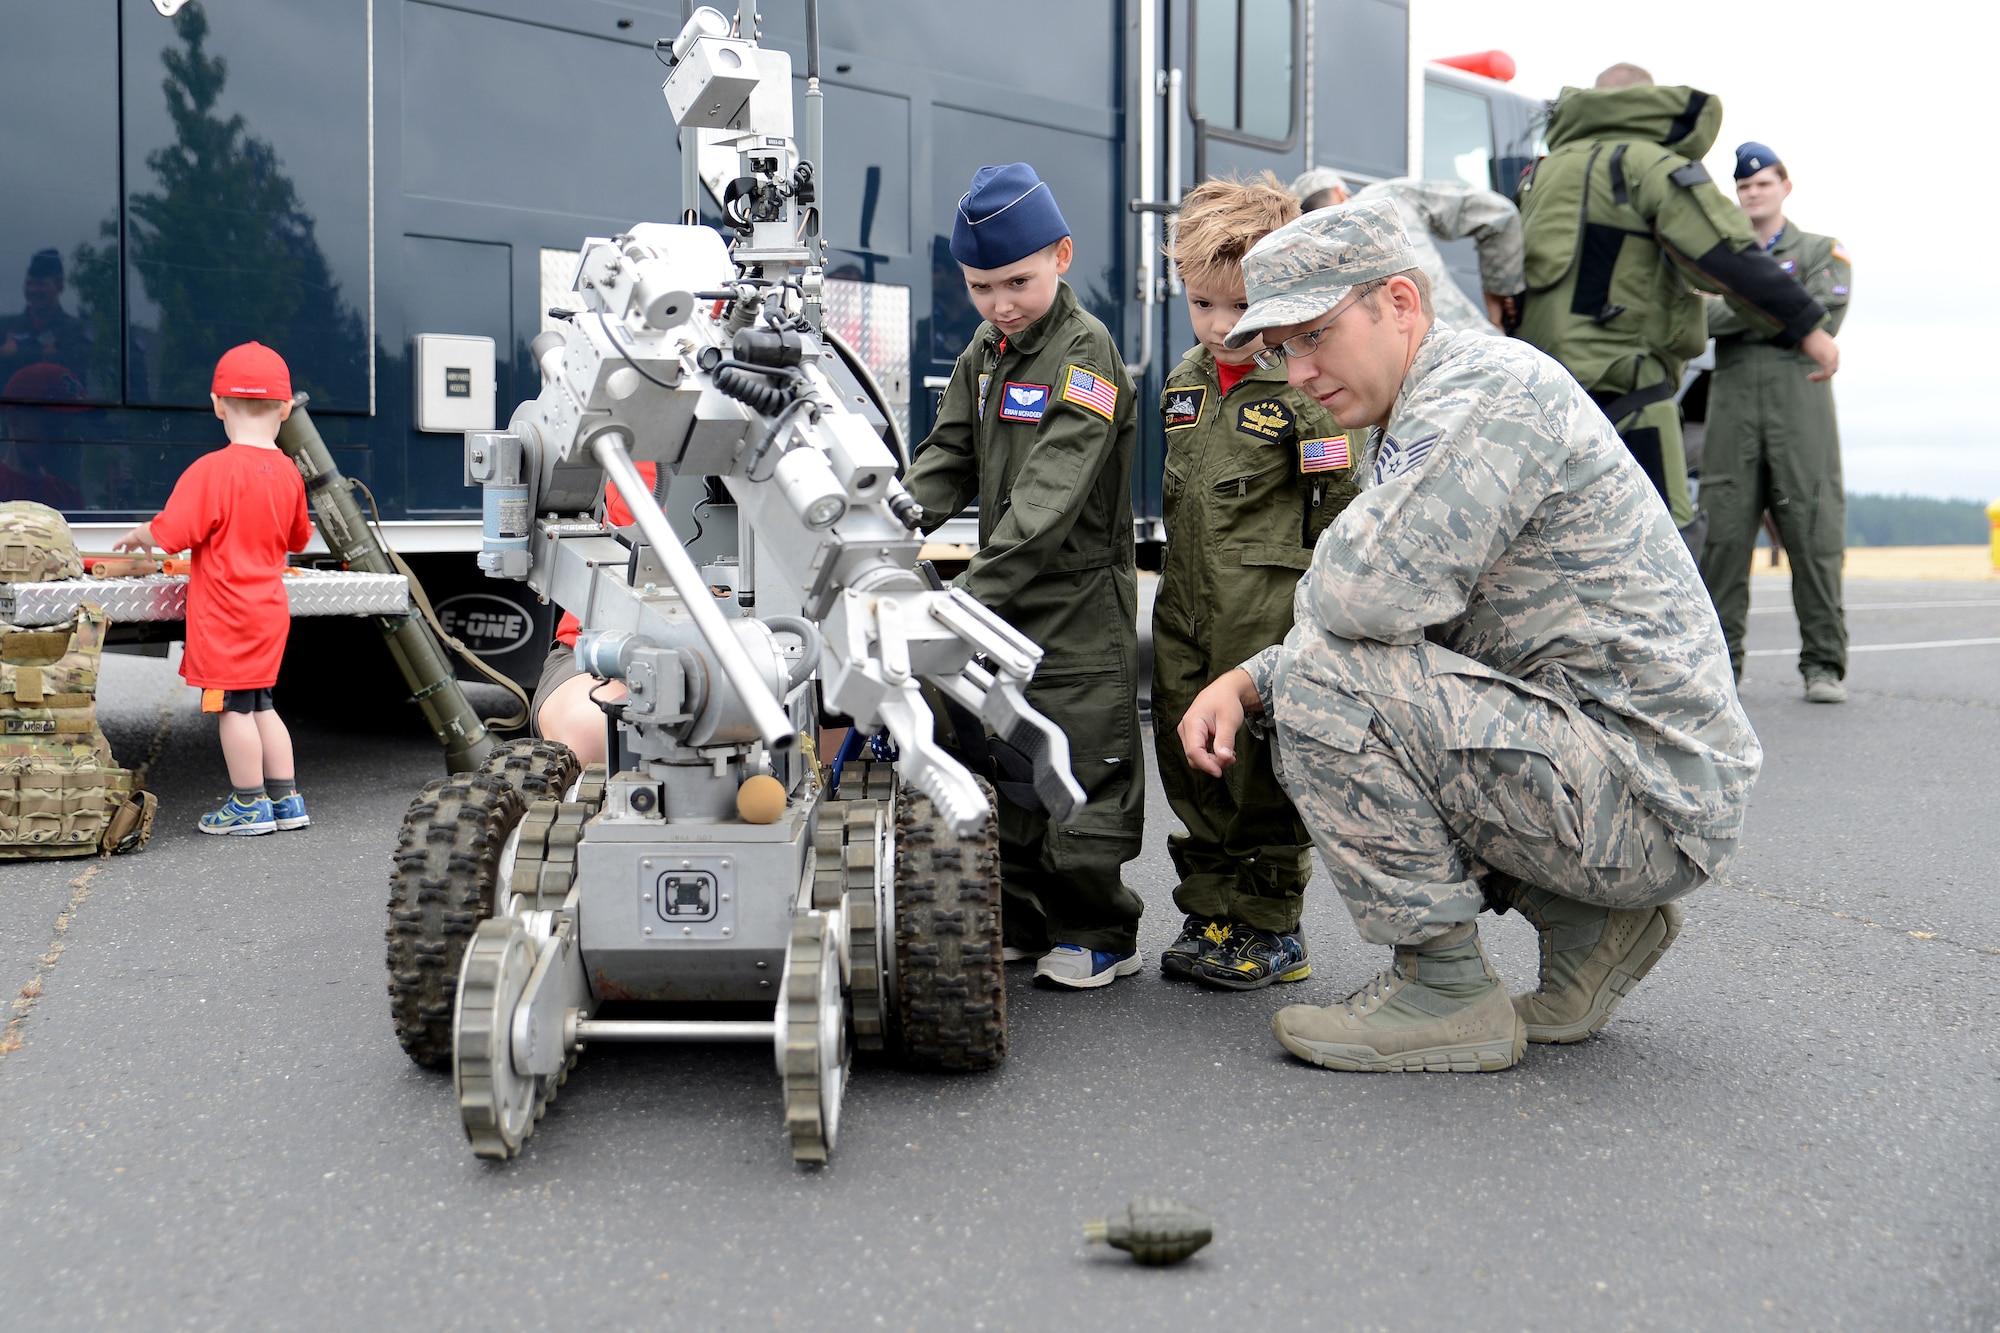 Ewan McFadgen, Pilot for a Day, controls a 627th Civil Engineer Squadron Explosive Ordinance Disposal F-6A robot July 10, 2015, during his tour of Joint Base Lewis-McChord, Wash. The EOD F-6A robot is used by the 627th CES EOD team when dealing with explosives or unknown packages. (U.S. Air Force photo/Airman 1st Class Keoni Chavarria)